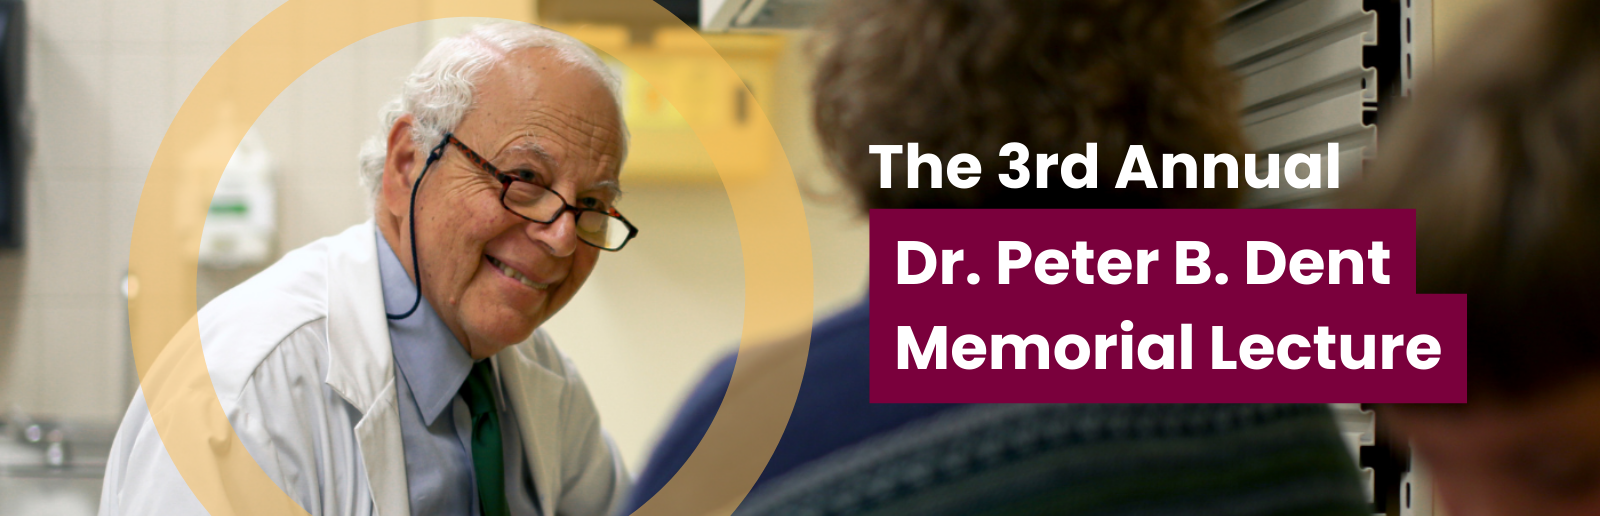 The 3rd Annual Dr. Peter B. Dent Memorial Lecture